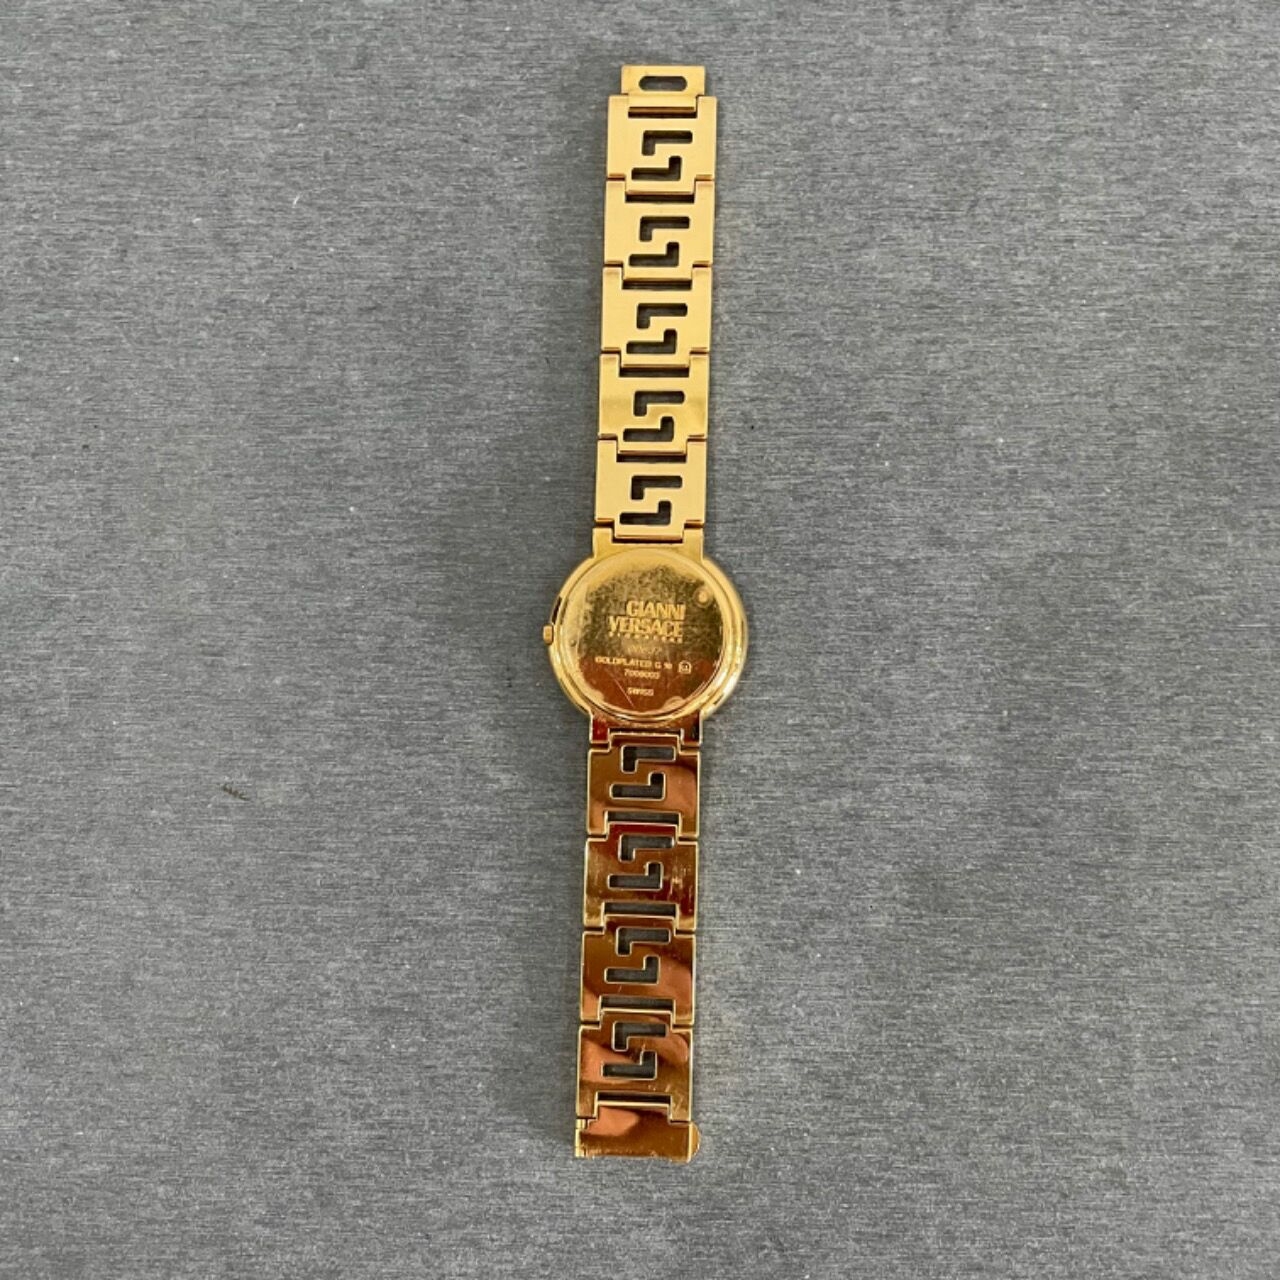 Gianni Versace Vintage Gold Plated Medusa Watch